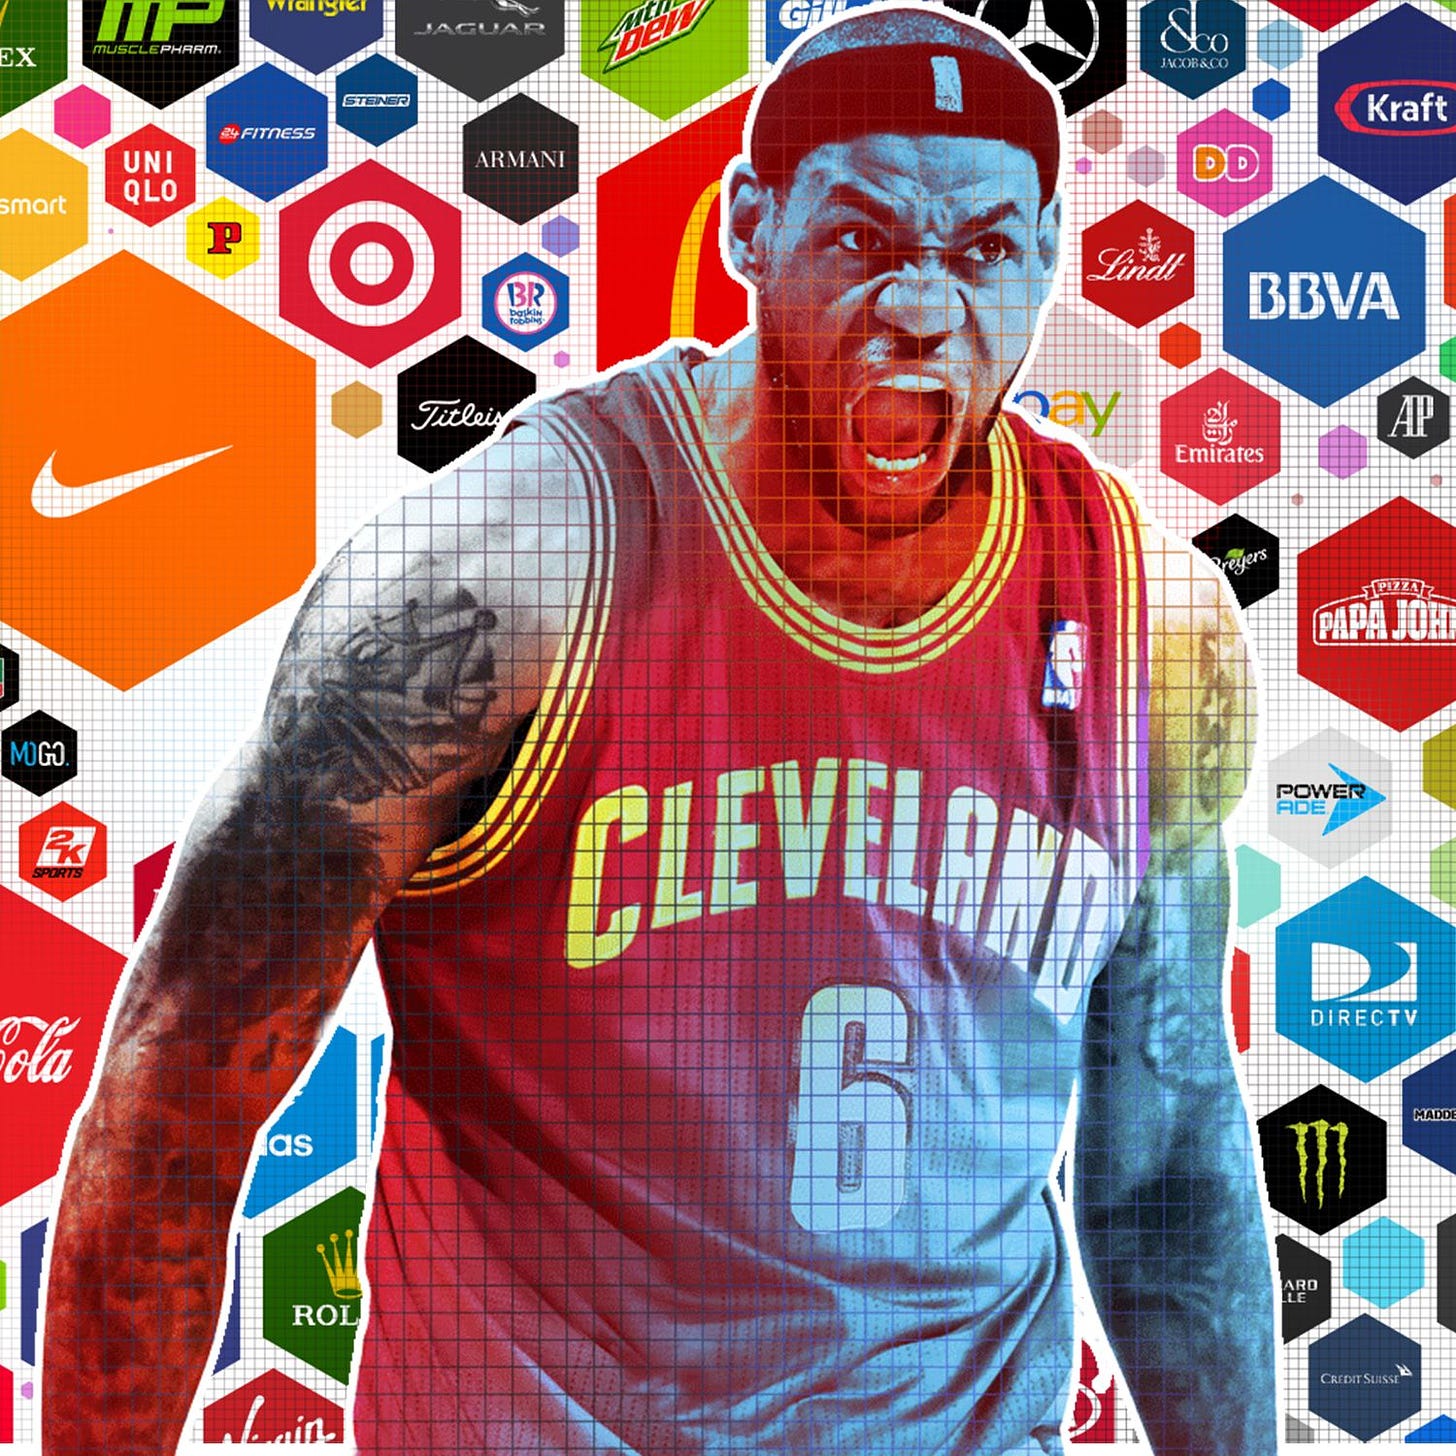 Bleacher Report (With images) | Athlete, Bleacher report, Sports